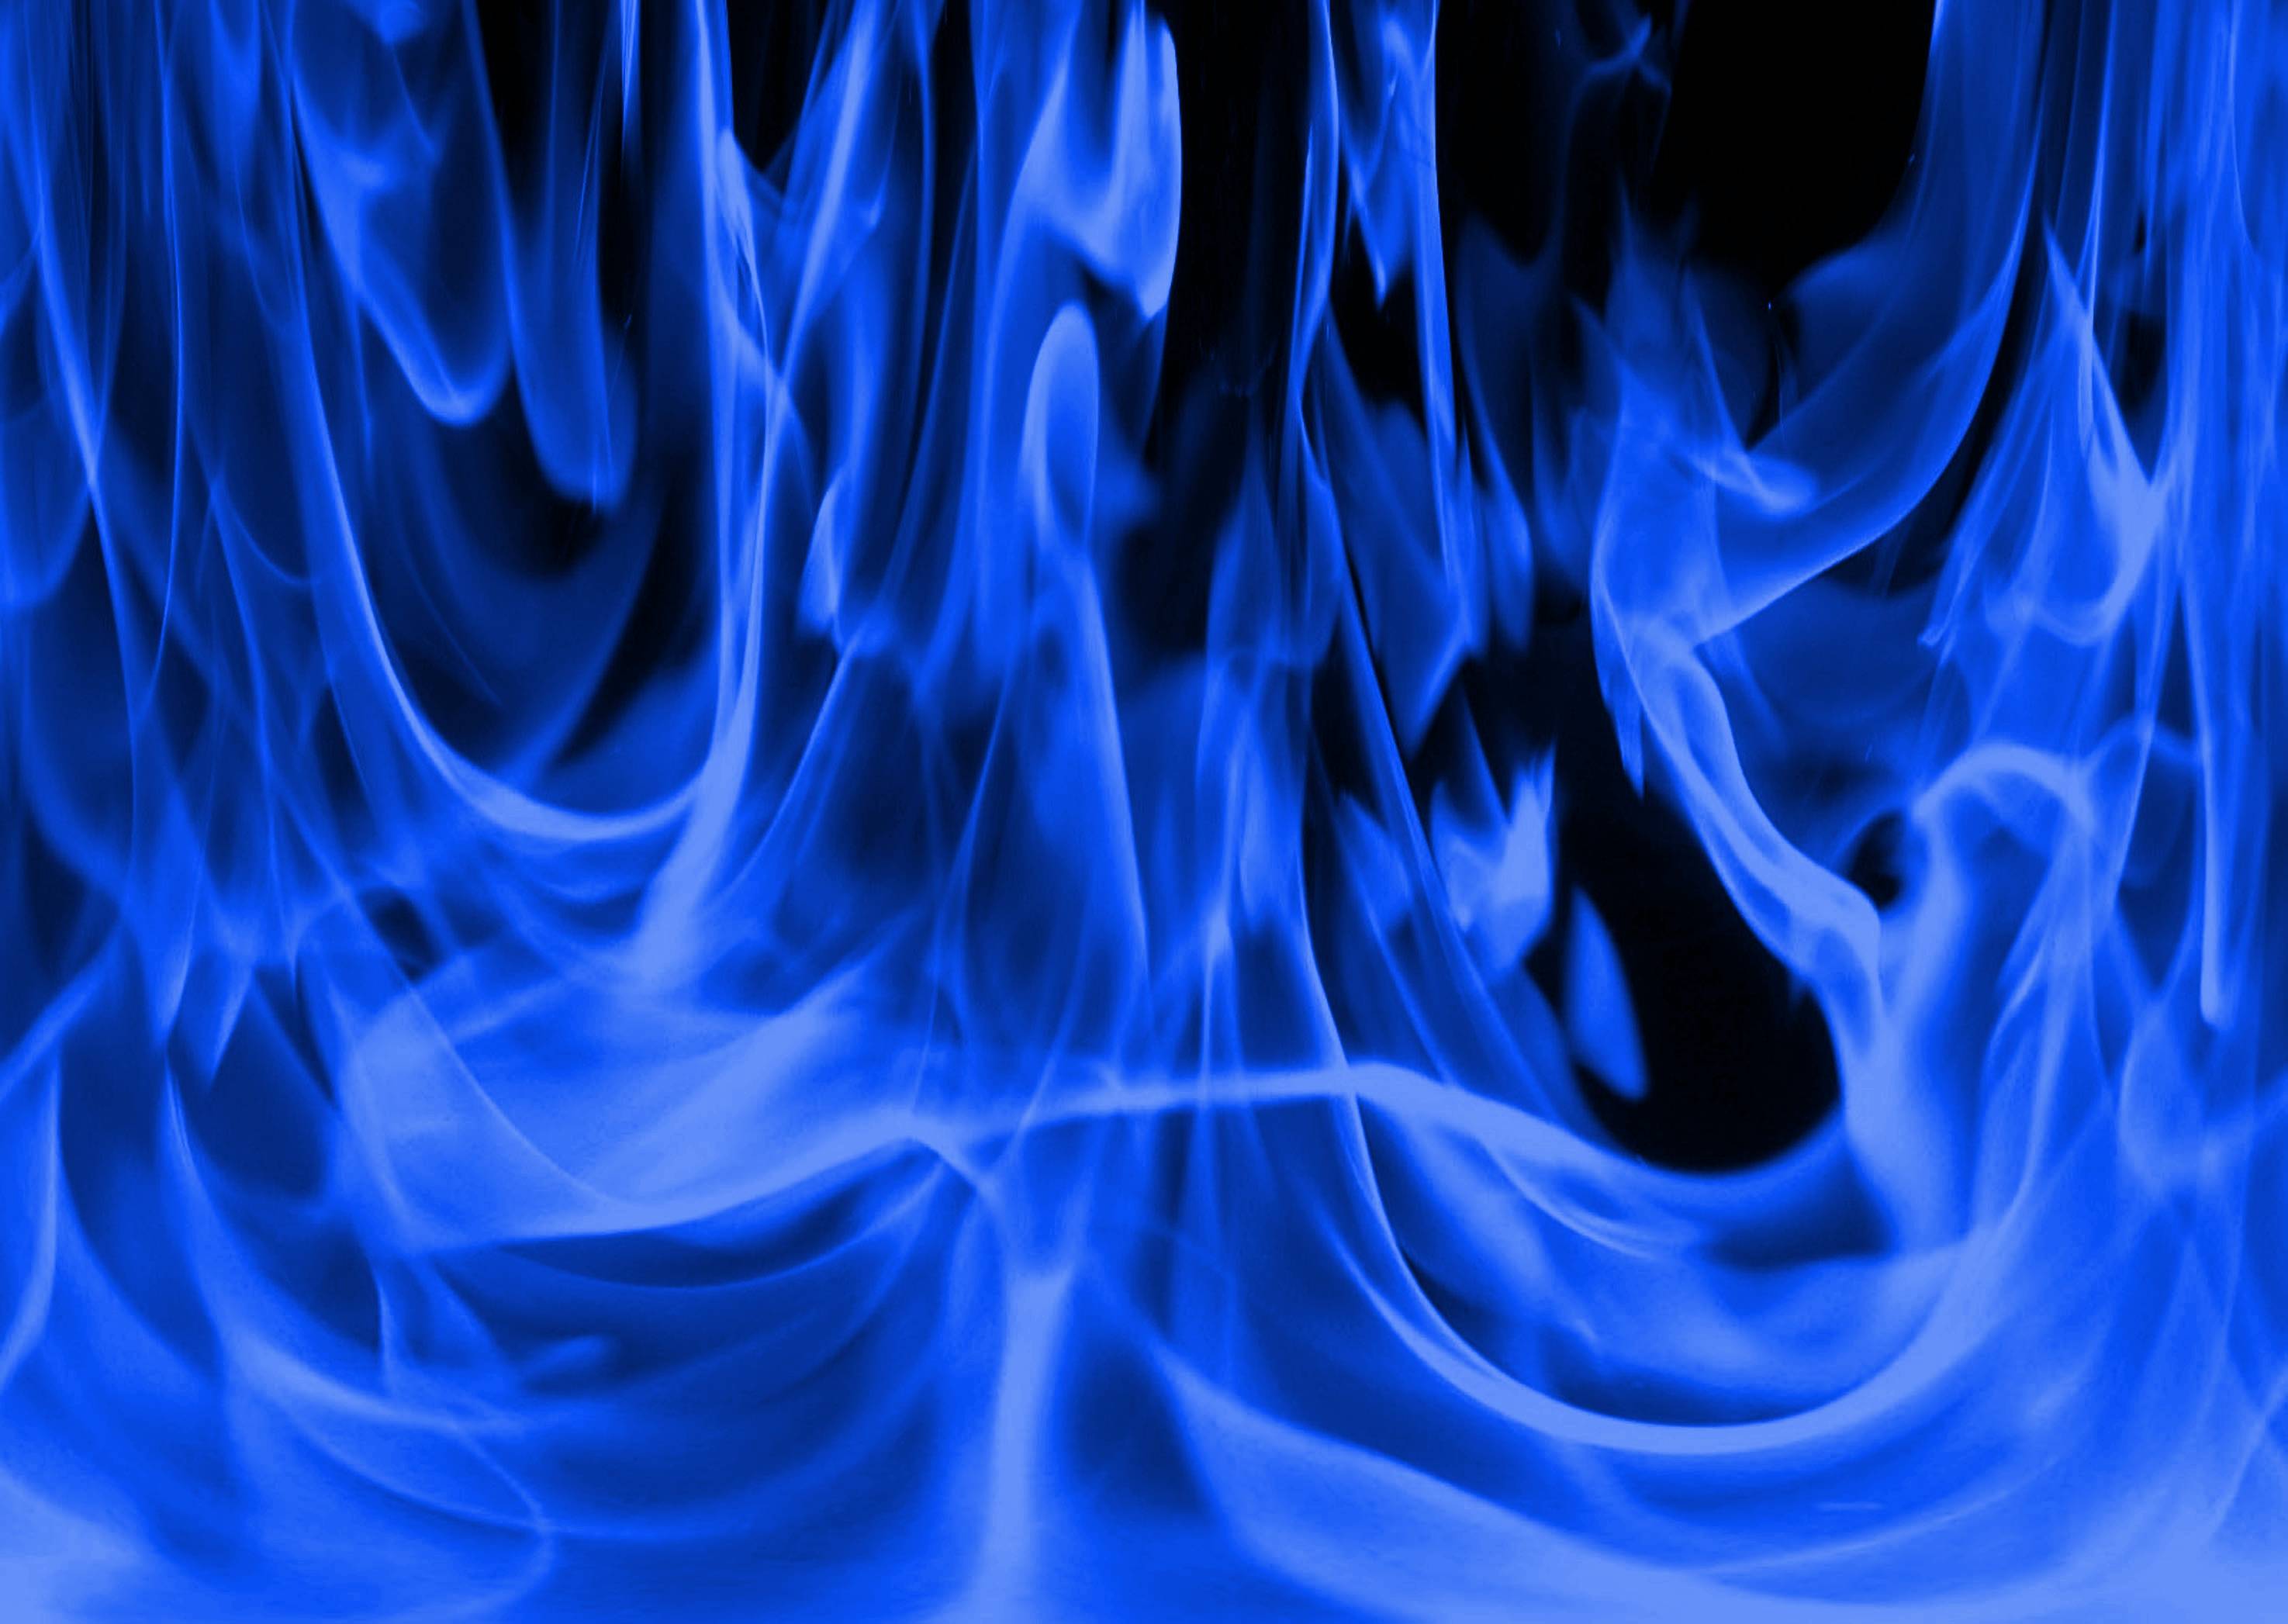 blue and red fire wallpapers wallpaper cave blue and red fire wallpapers